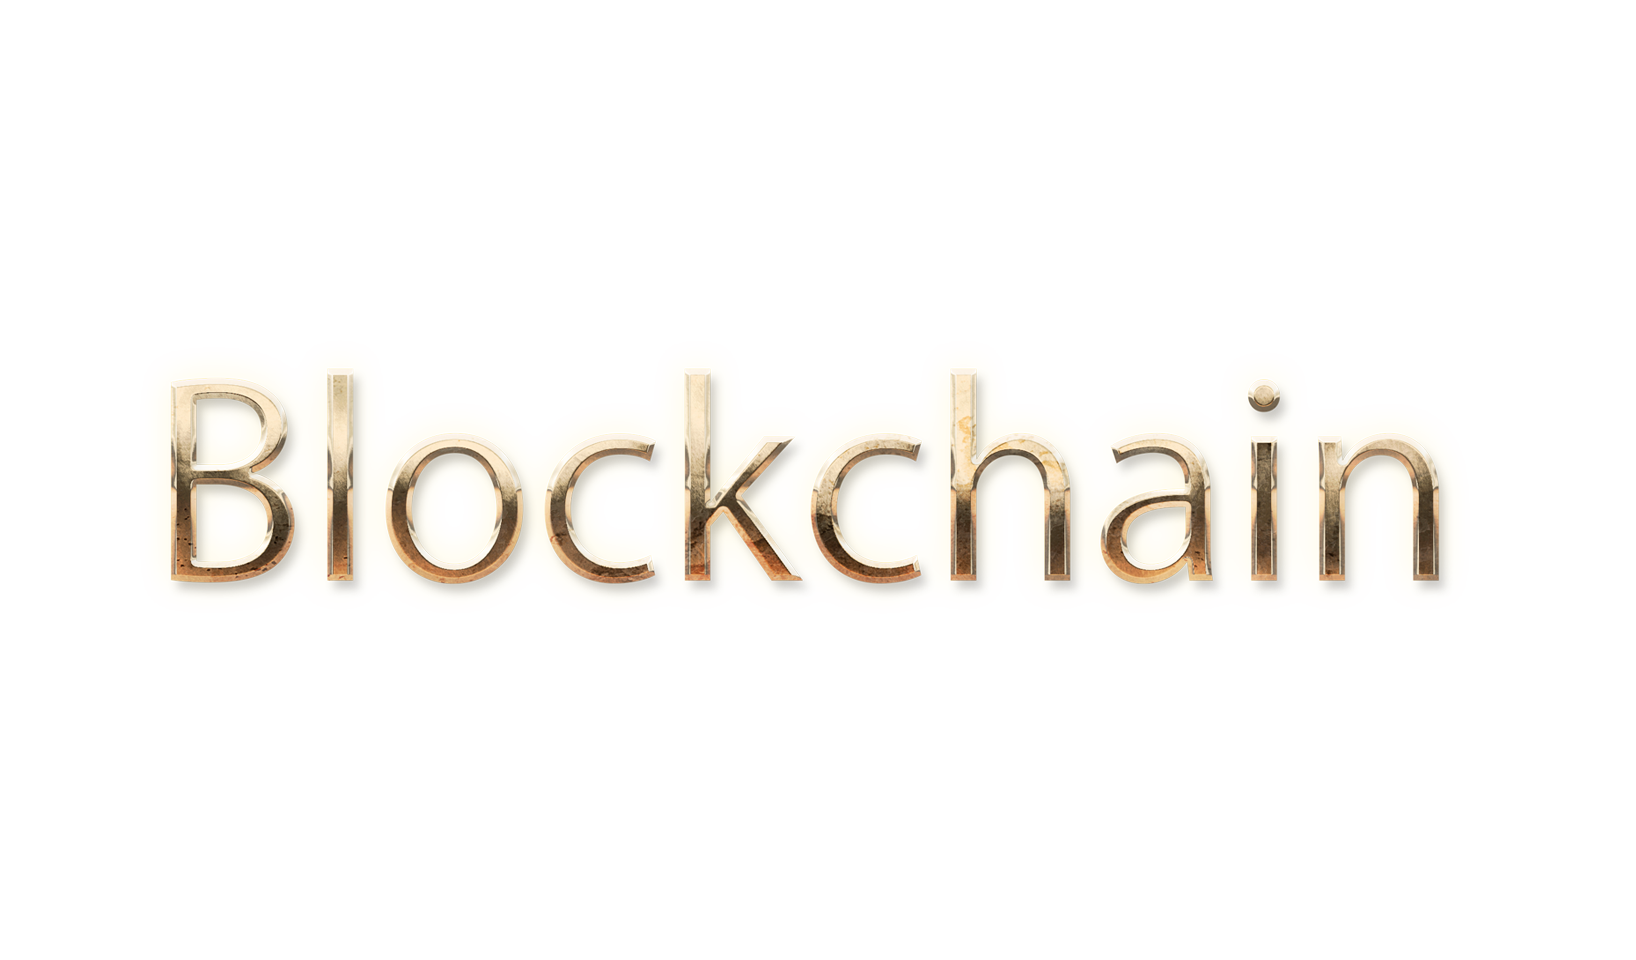 WORD BLOCKCHAIN gold text typography PNG images free